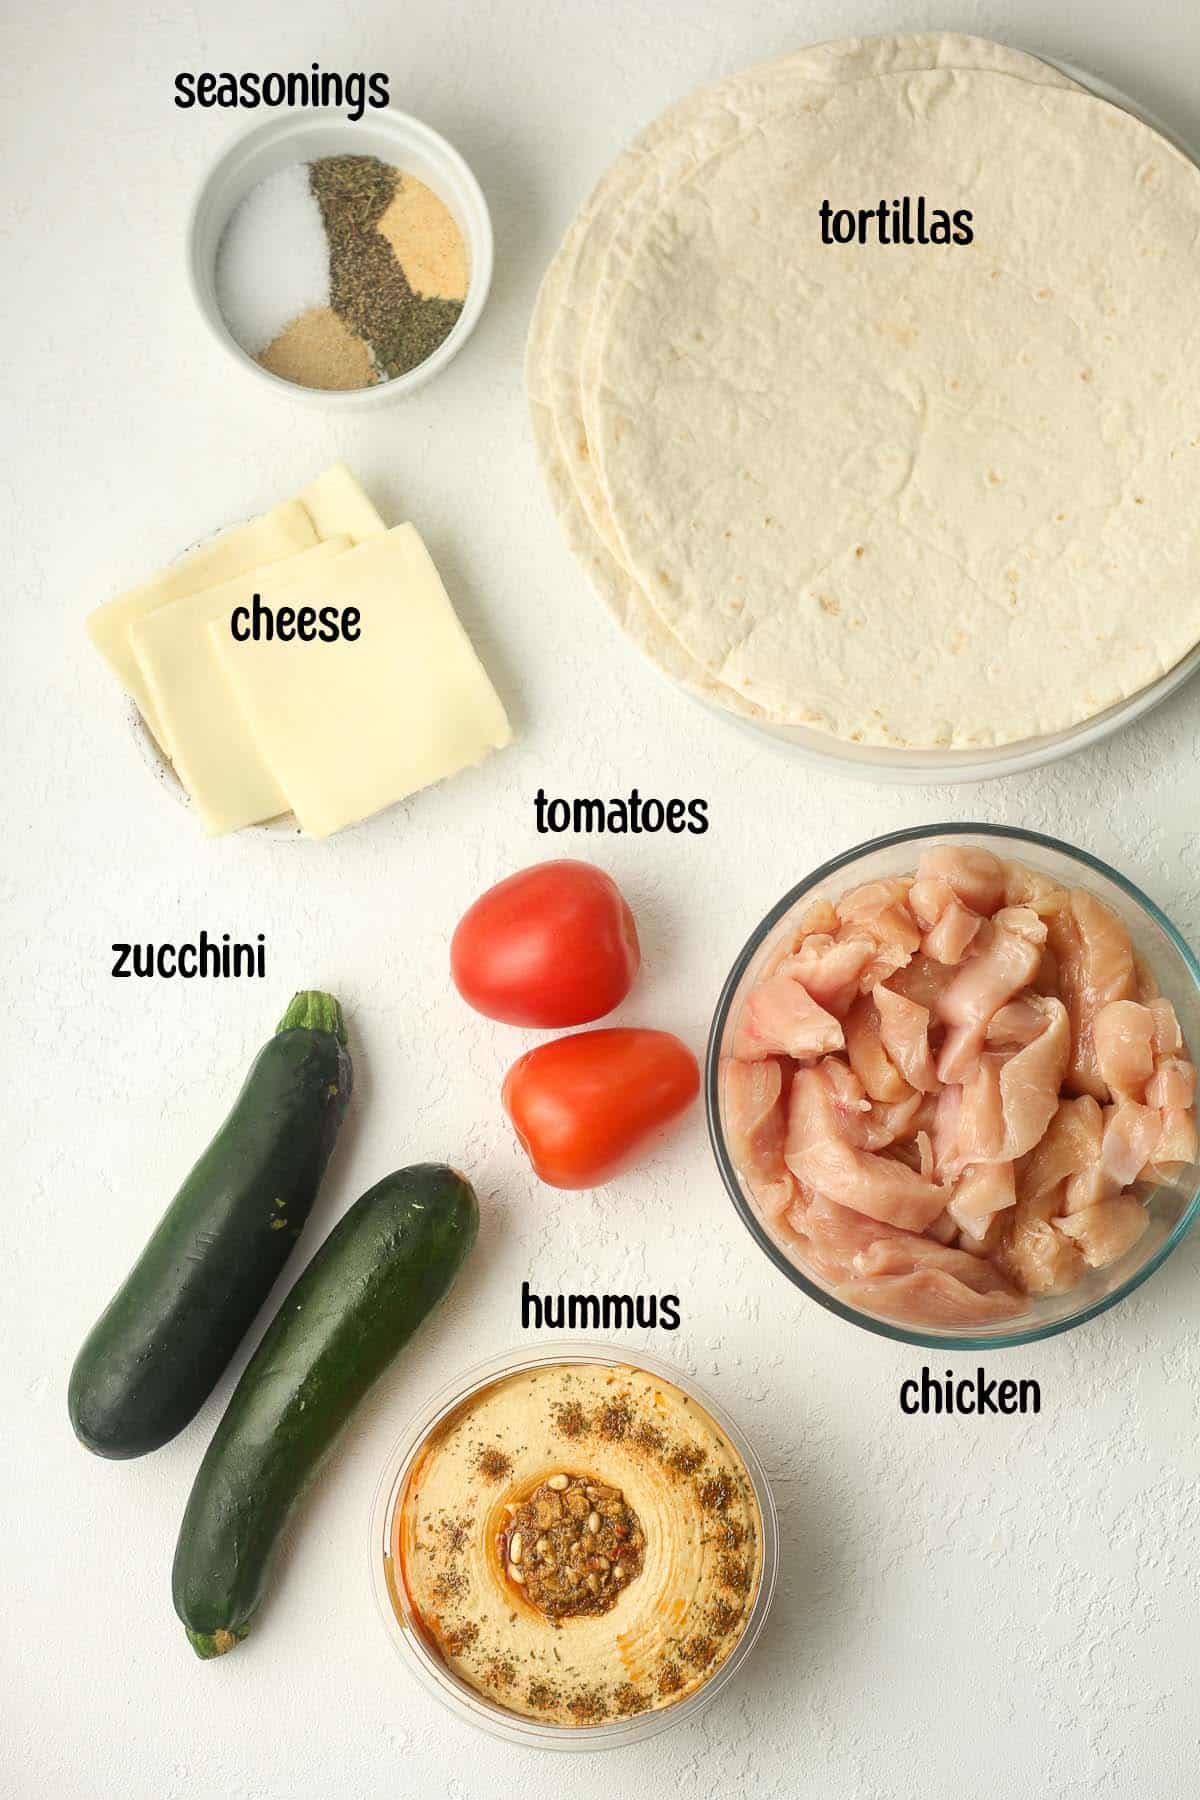 The ingredients for the chicken wraps.